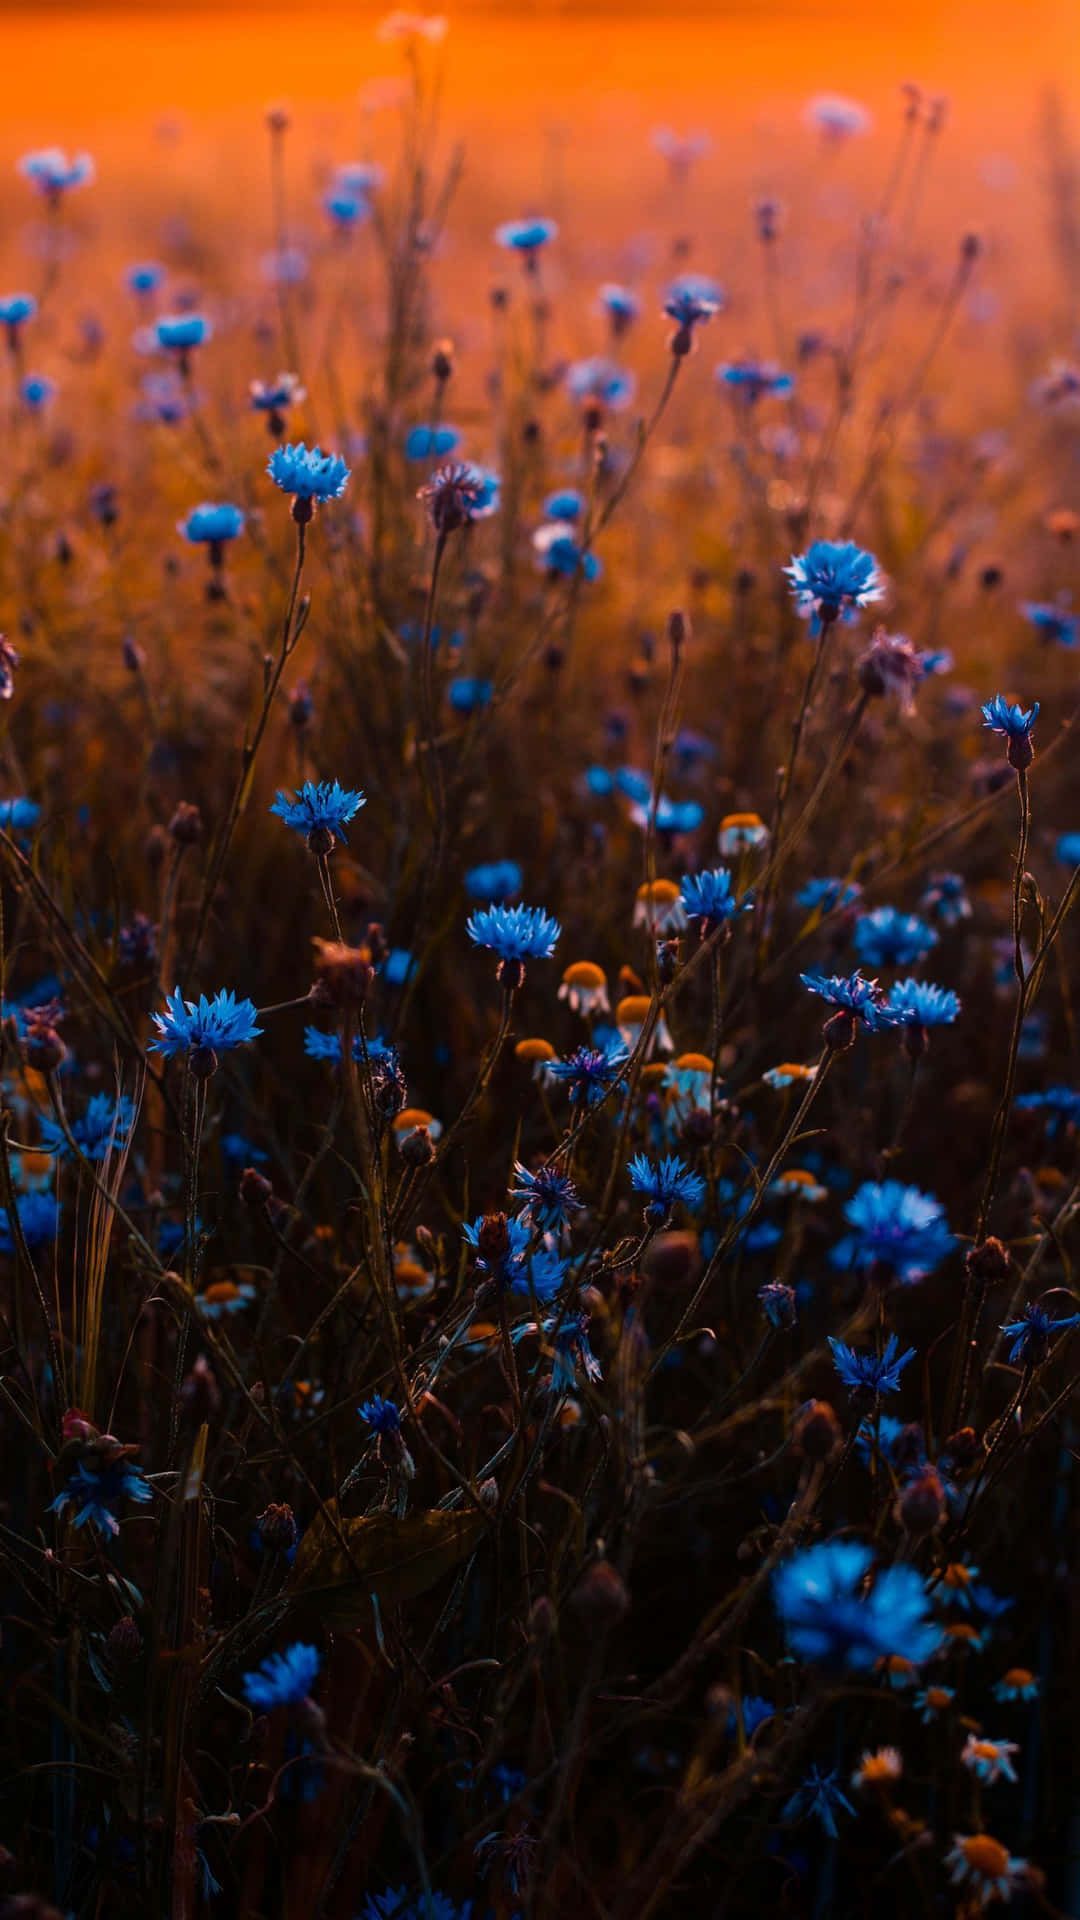 A field of flowers with the sun setting in background - Flower